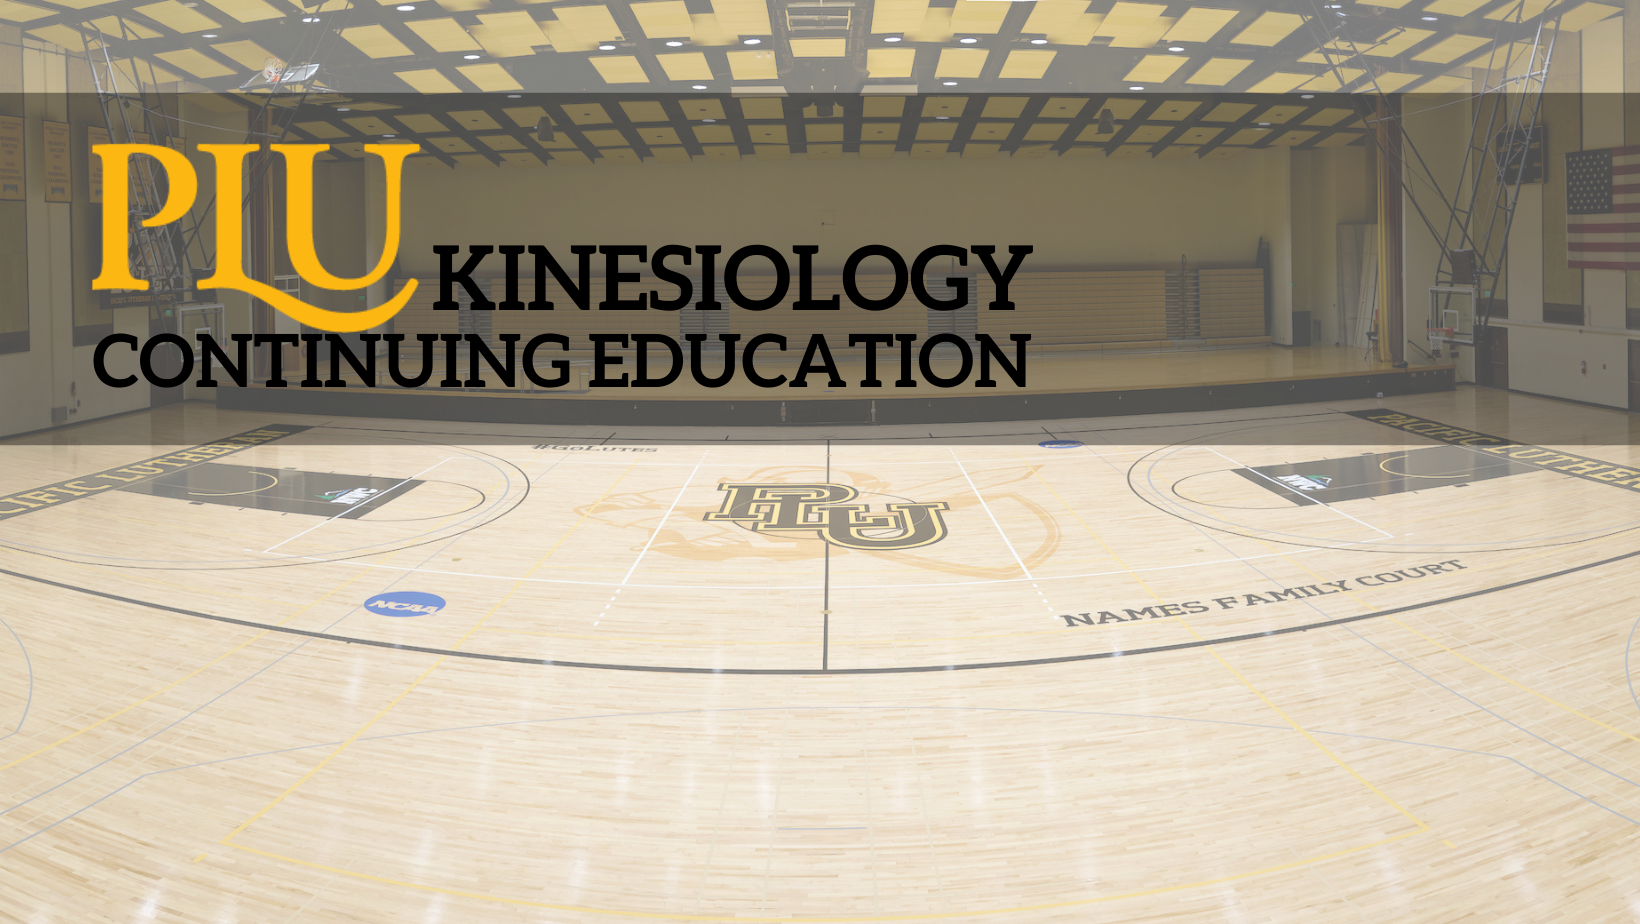 Empty Lute basketball court with the PLU logo in the top corner of the photo and the words "kinesiology continuing education" overlay